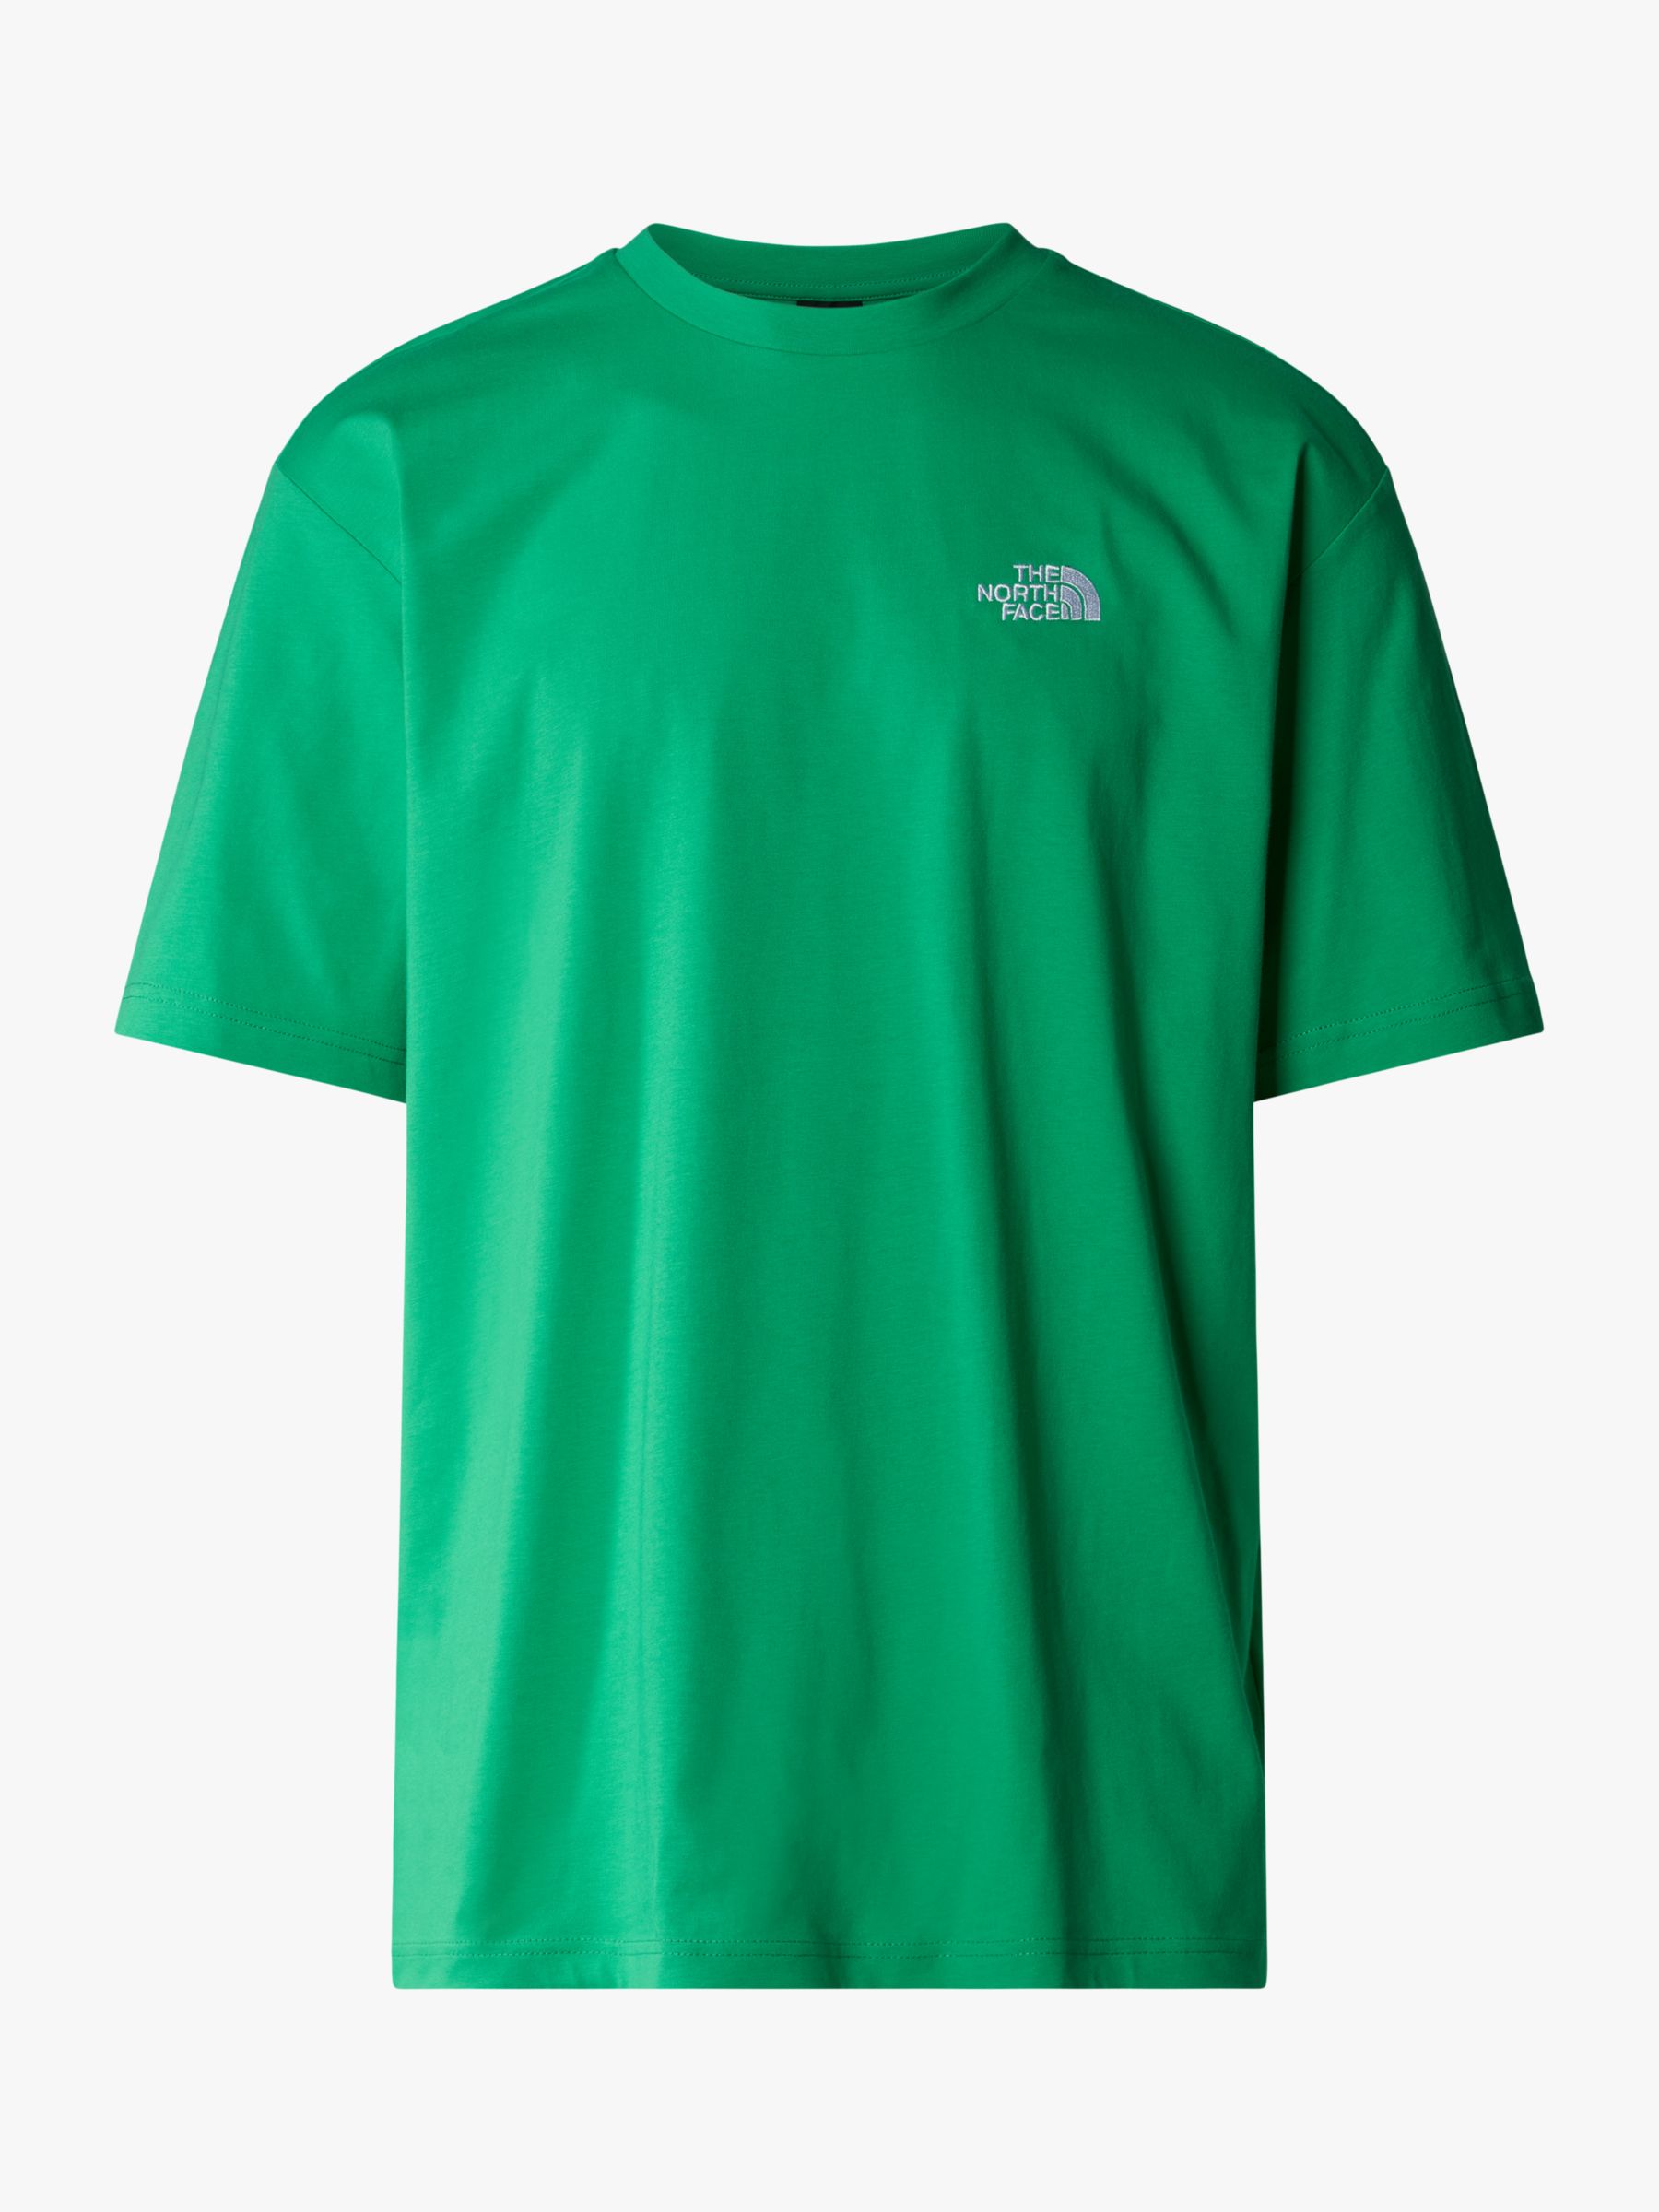 The North Face Oversized Dome T-Shirt, Optic Emerald, S